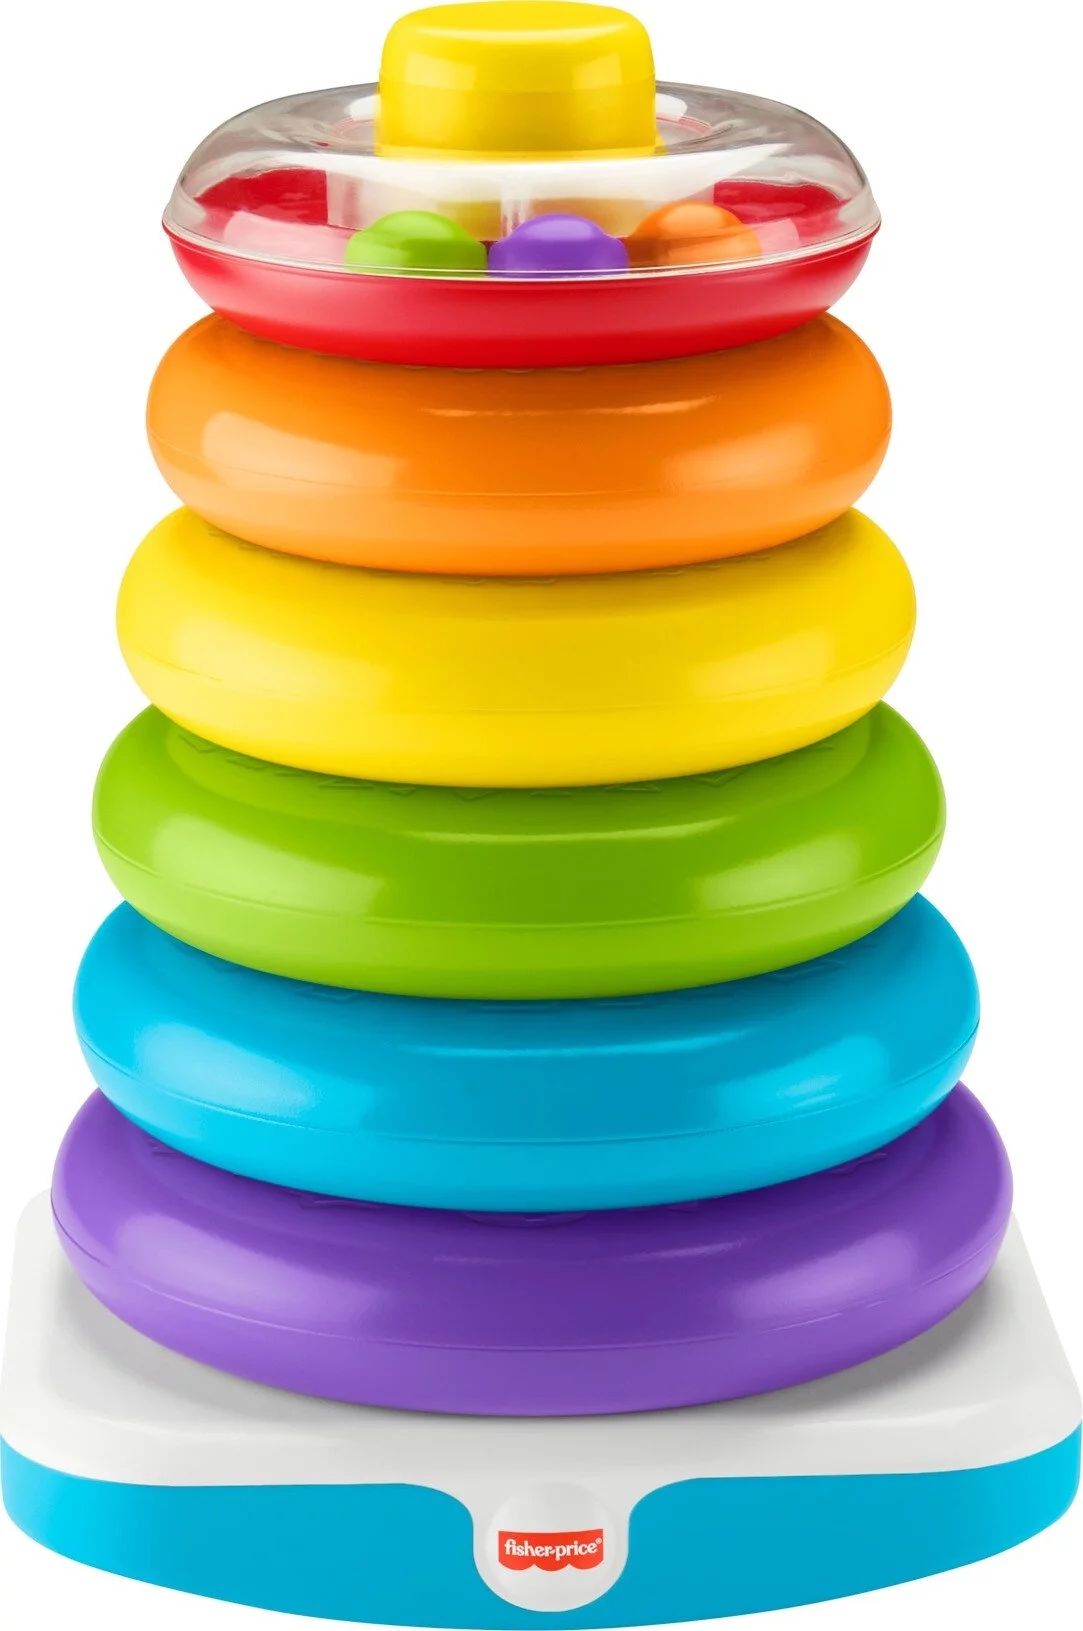 Fisher-Price Giant Rock-A-Stack Baby Toy, Ring Stacking Toy For Infants And Toddlers, 14+ Inches ... | Walmart (US)